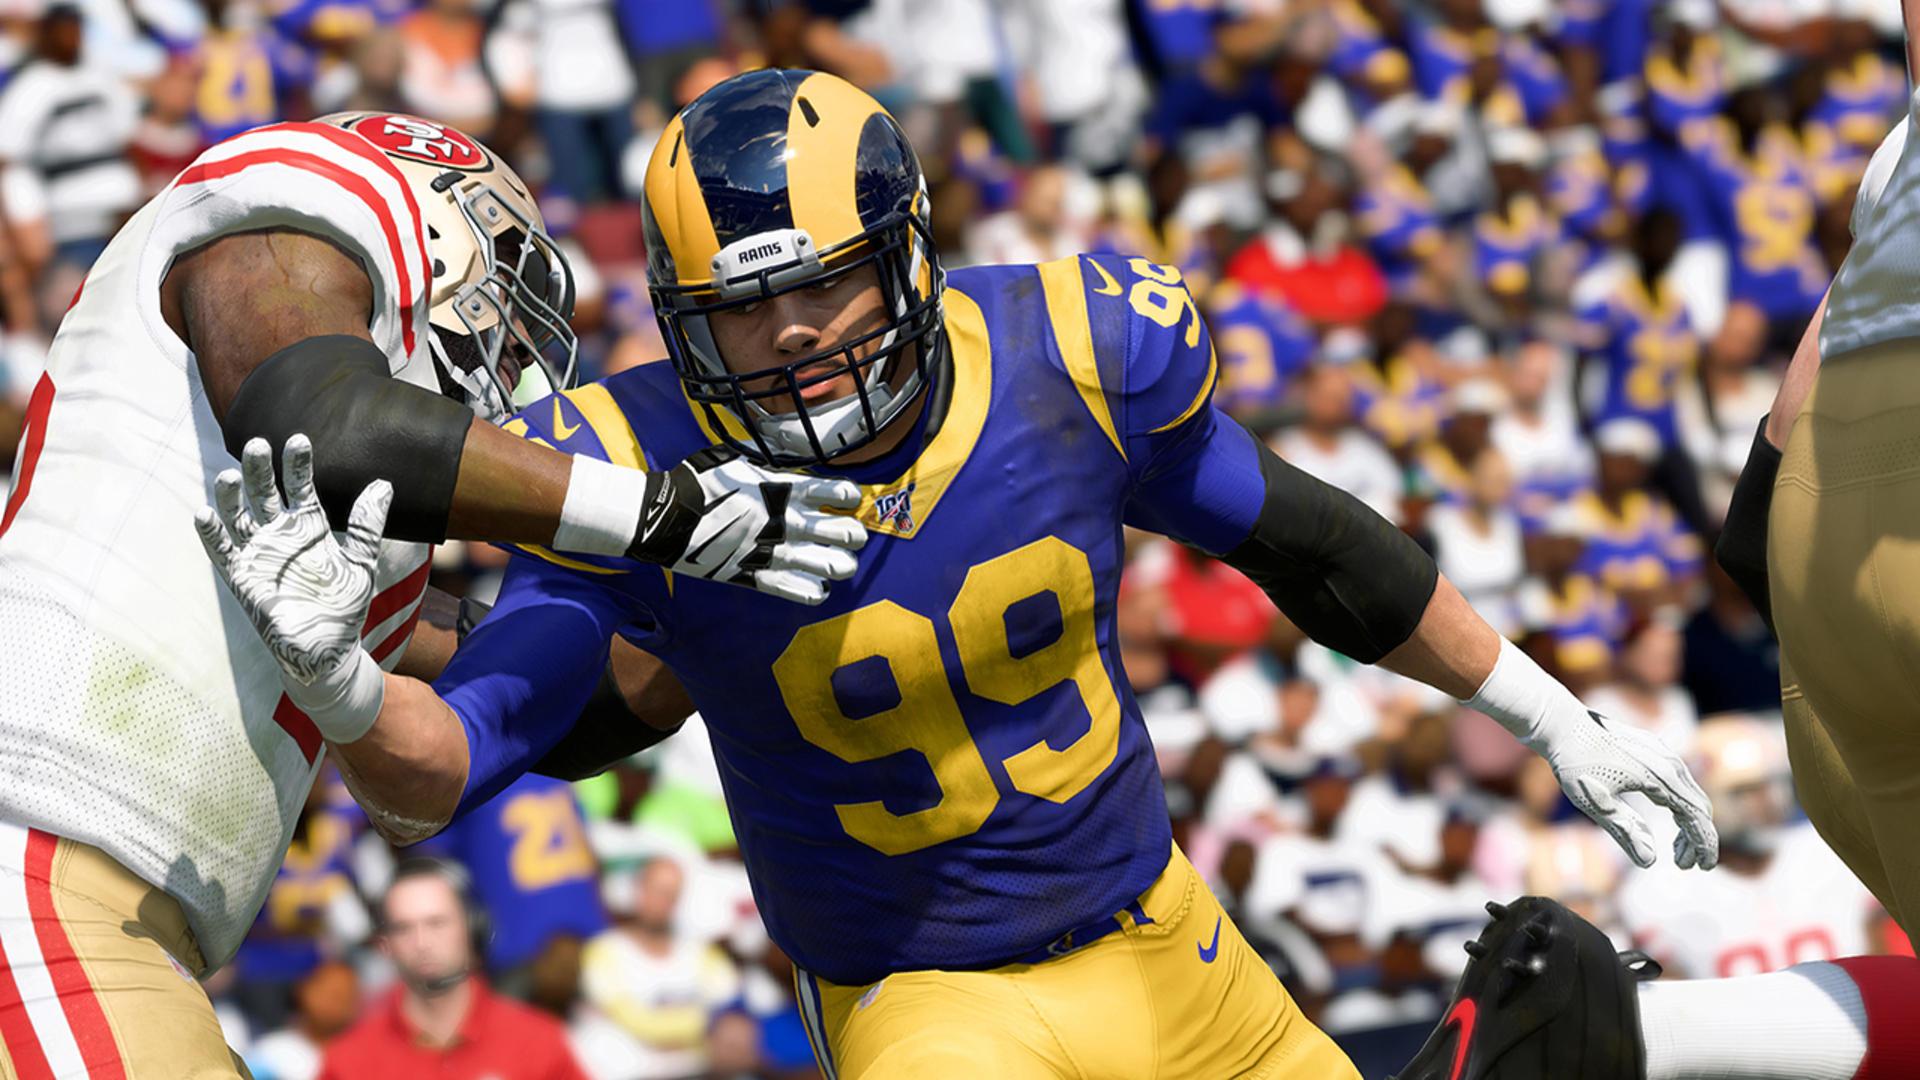 Madden 20 Franchise Mode is Finally Getting Something It's Needed